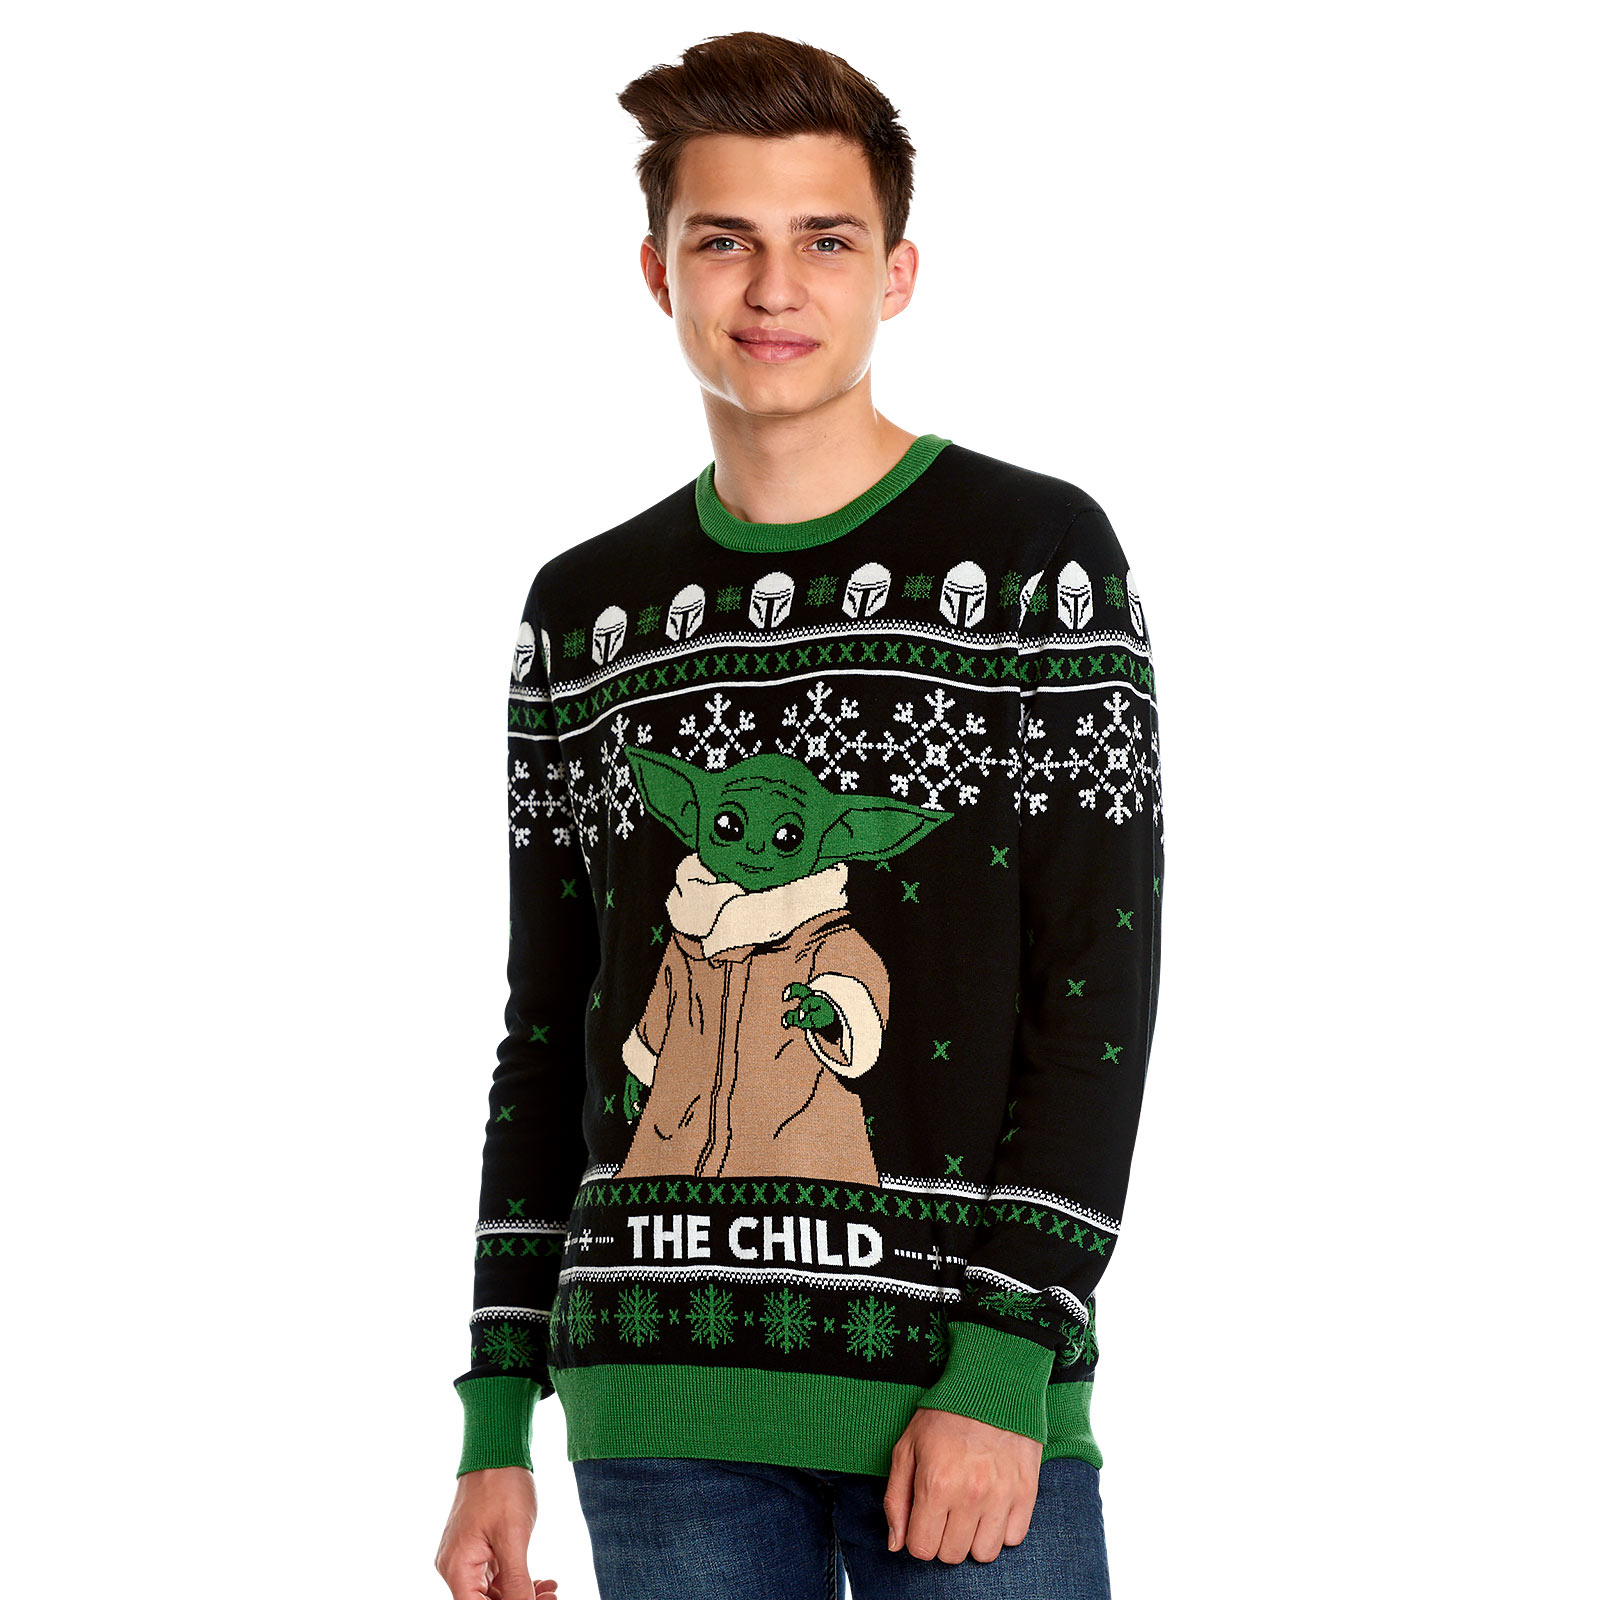 The Child Knitted Jumper - Star Wars The Mandalorian